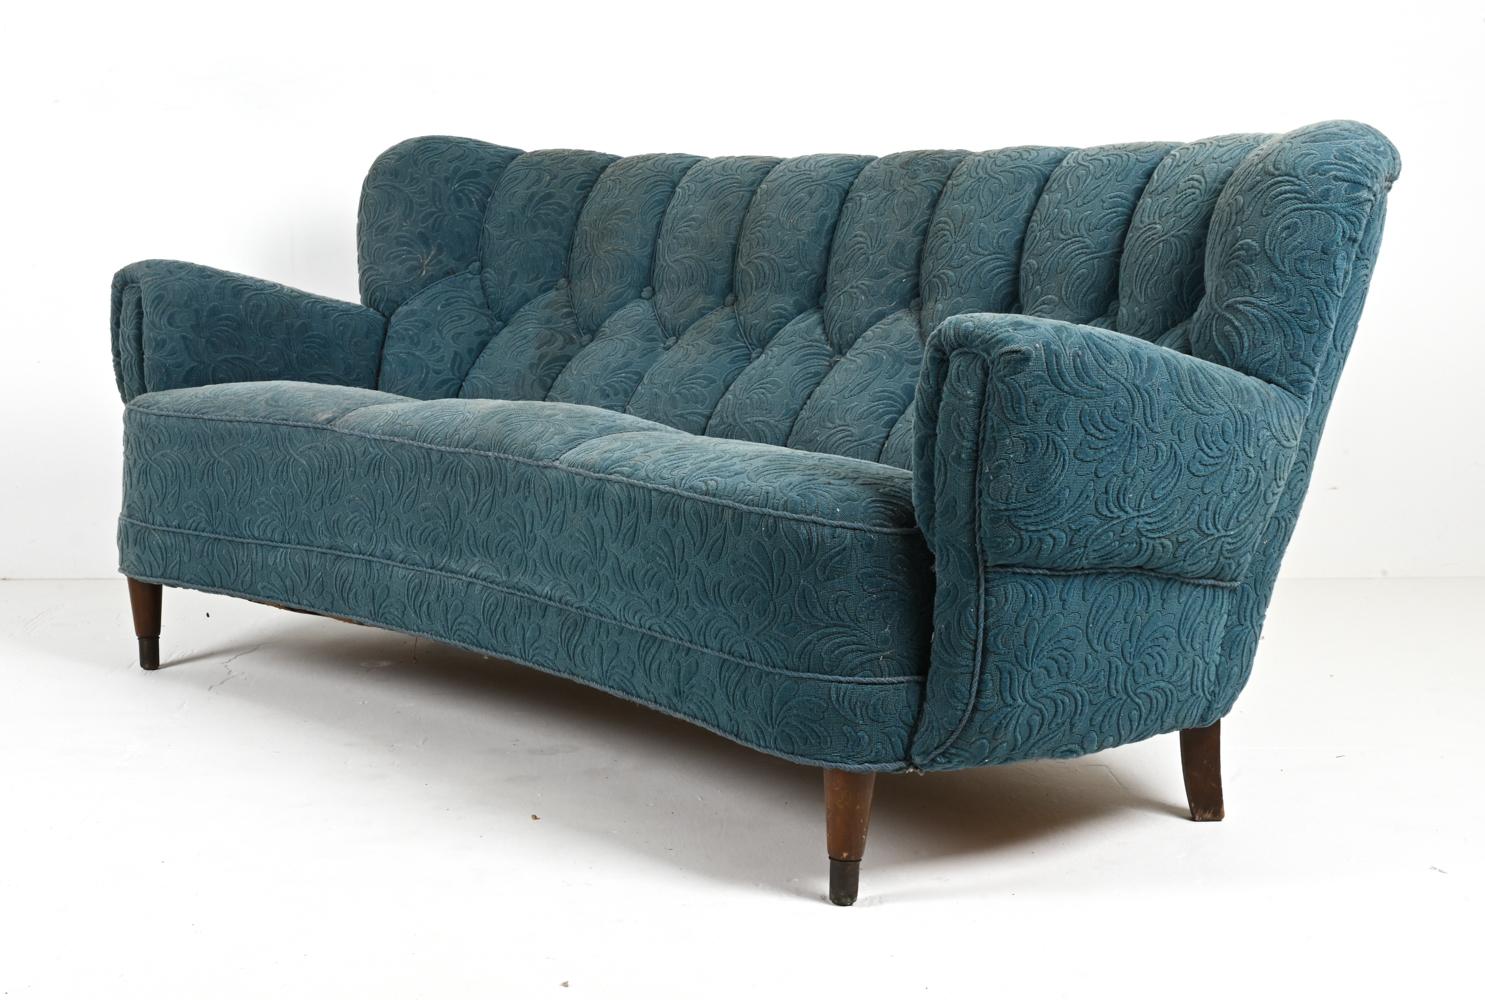 Journey into a world where design meets dream with this captivating Danish Mid-Century Sofa, channeling the evocative style of the legendary Flemming Lassen. A relic from the radiant 1940s, this piece gracefully straddles the line between art and